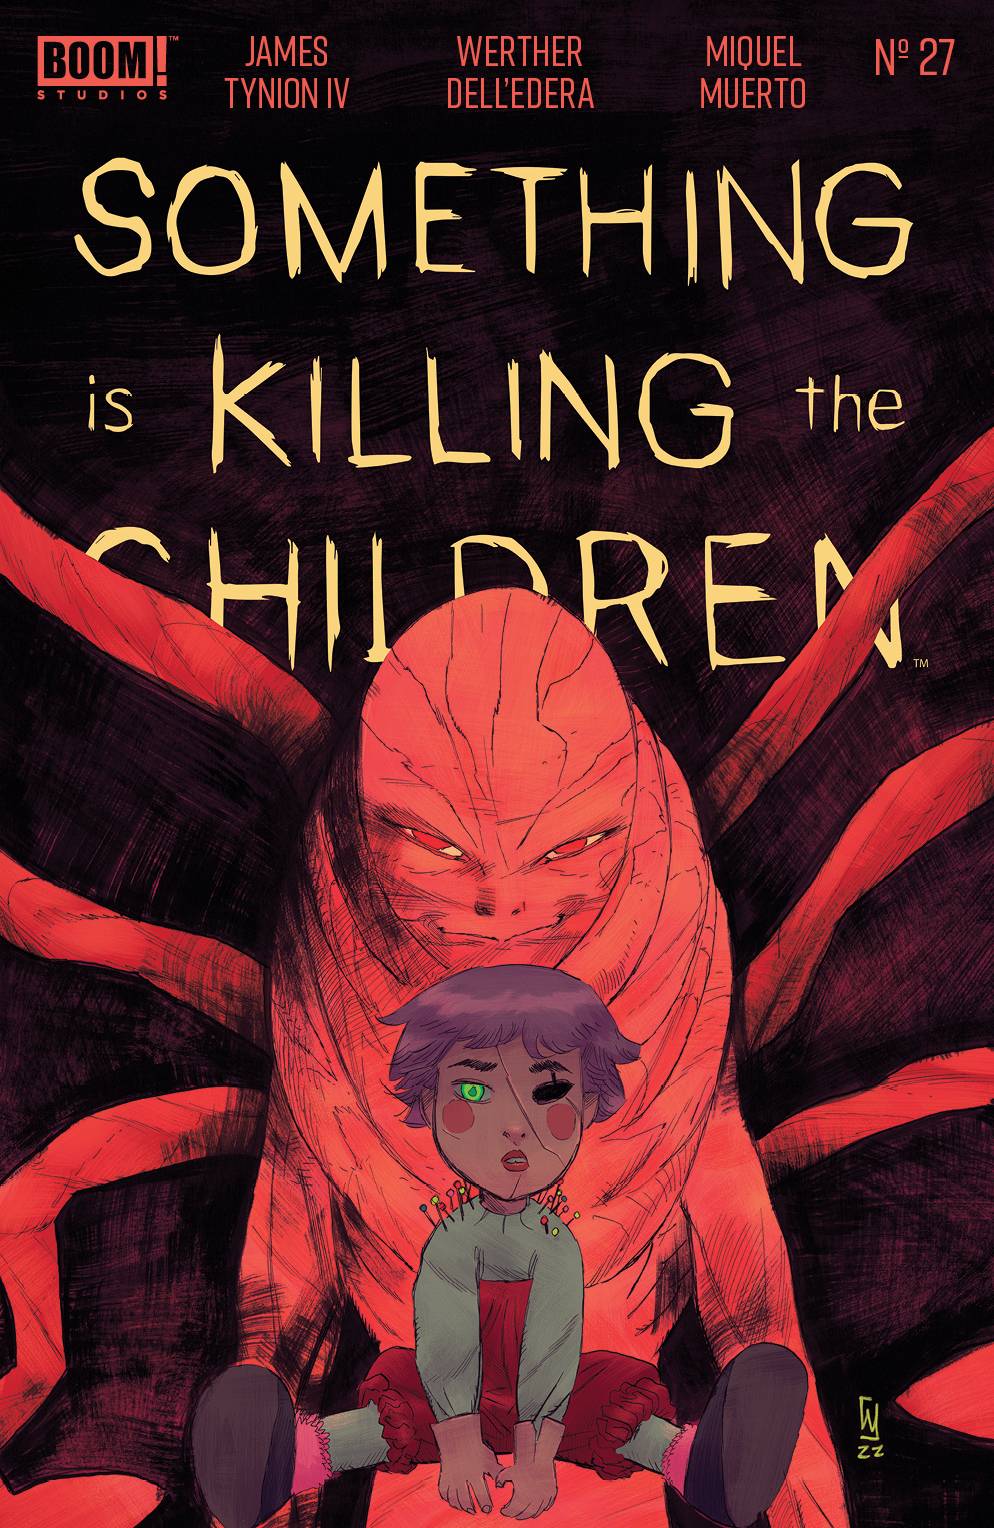 Something Is Killing The Children #27 (2019) Boom A Dell Edera 12/21/2022 | BD Cosmos